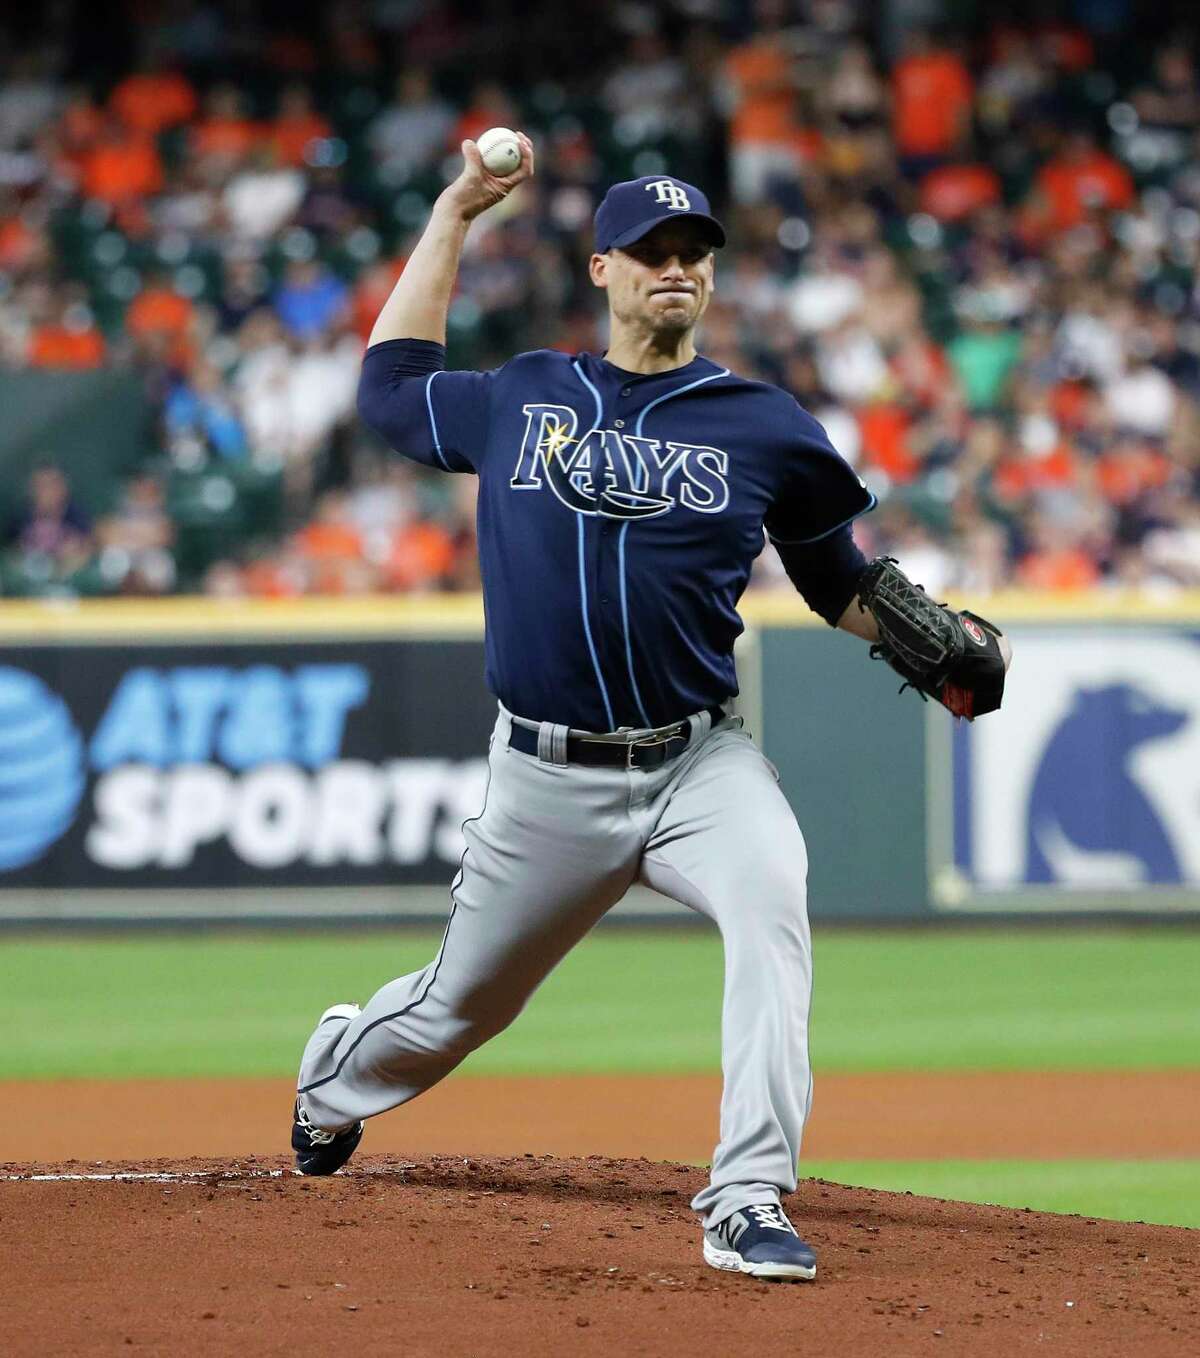 It's Absolutely Insane That The Tampa Bay Rays Don't Wear These